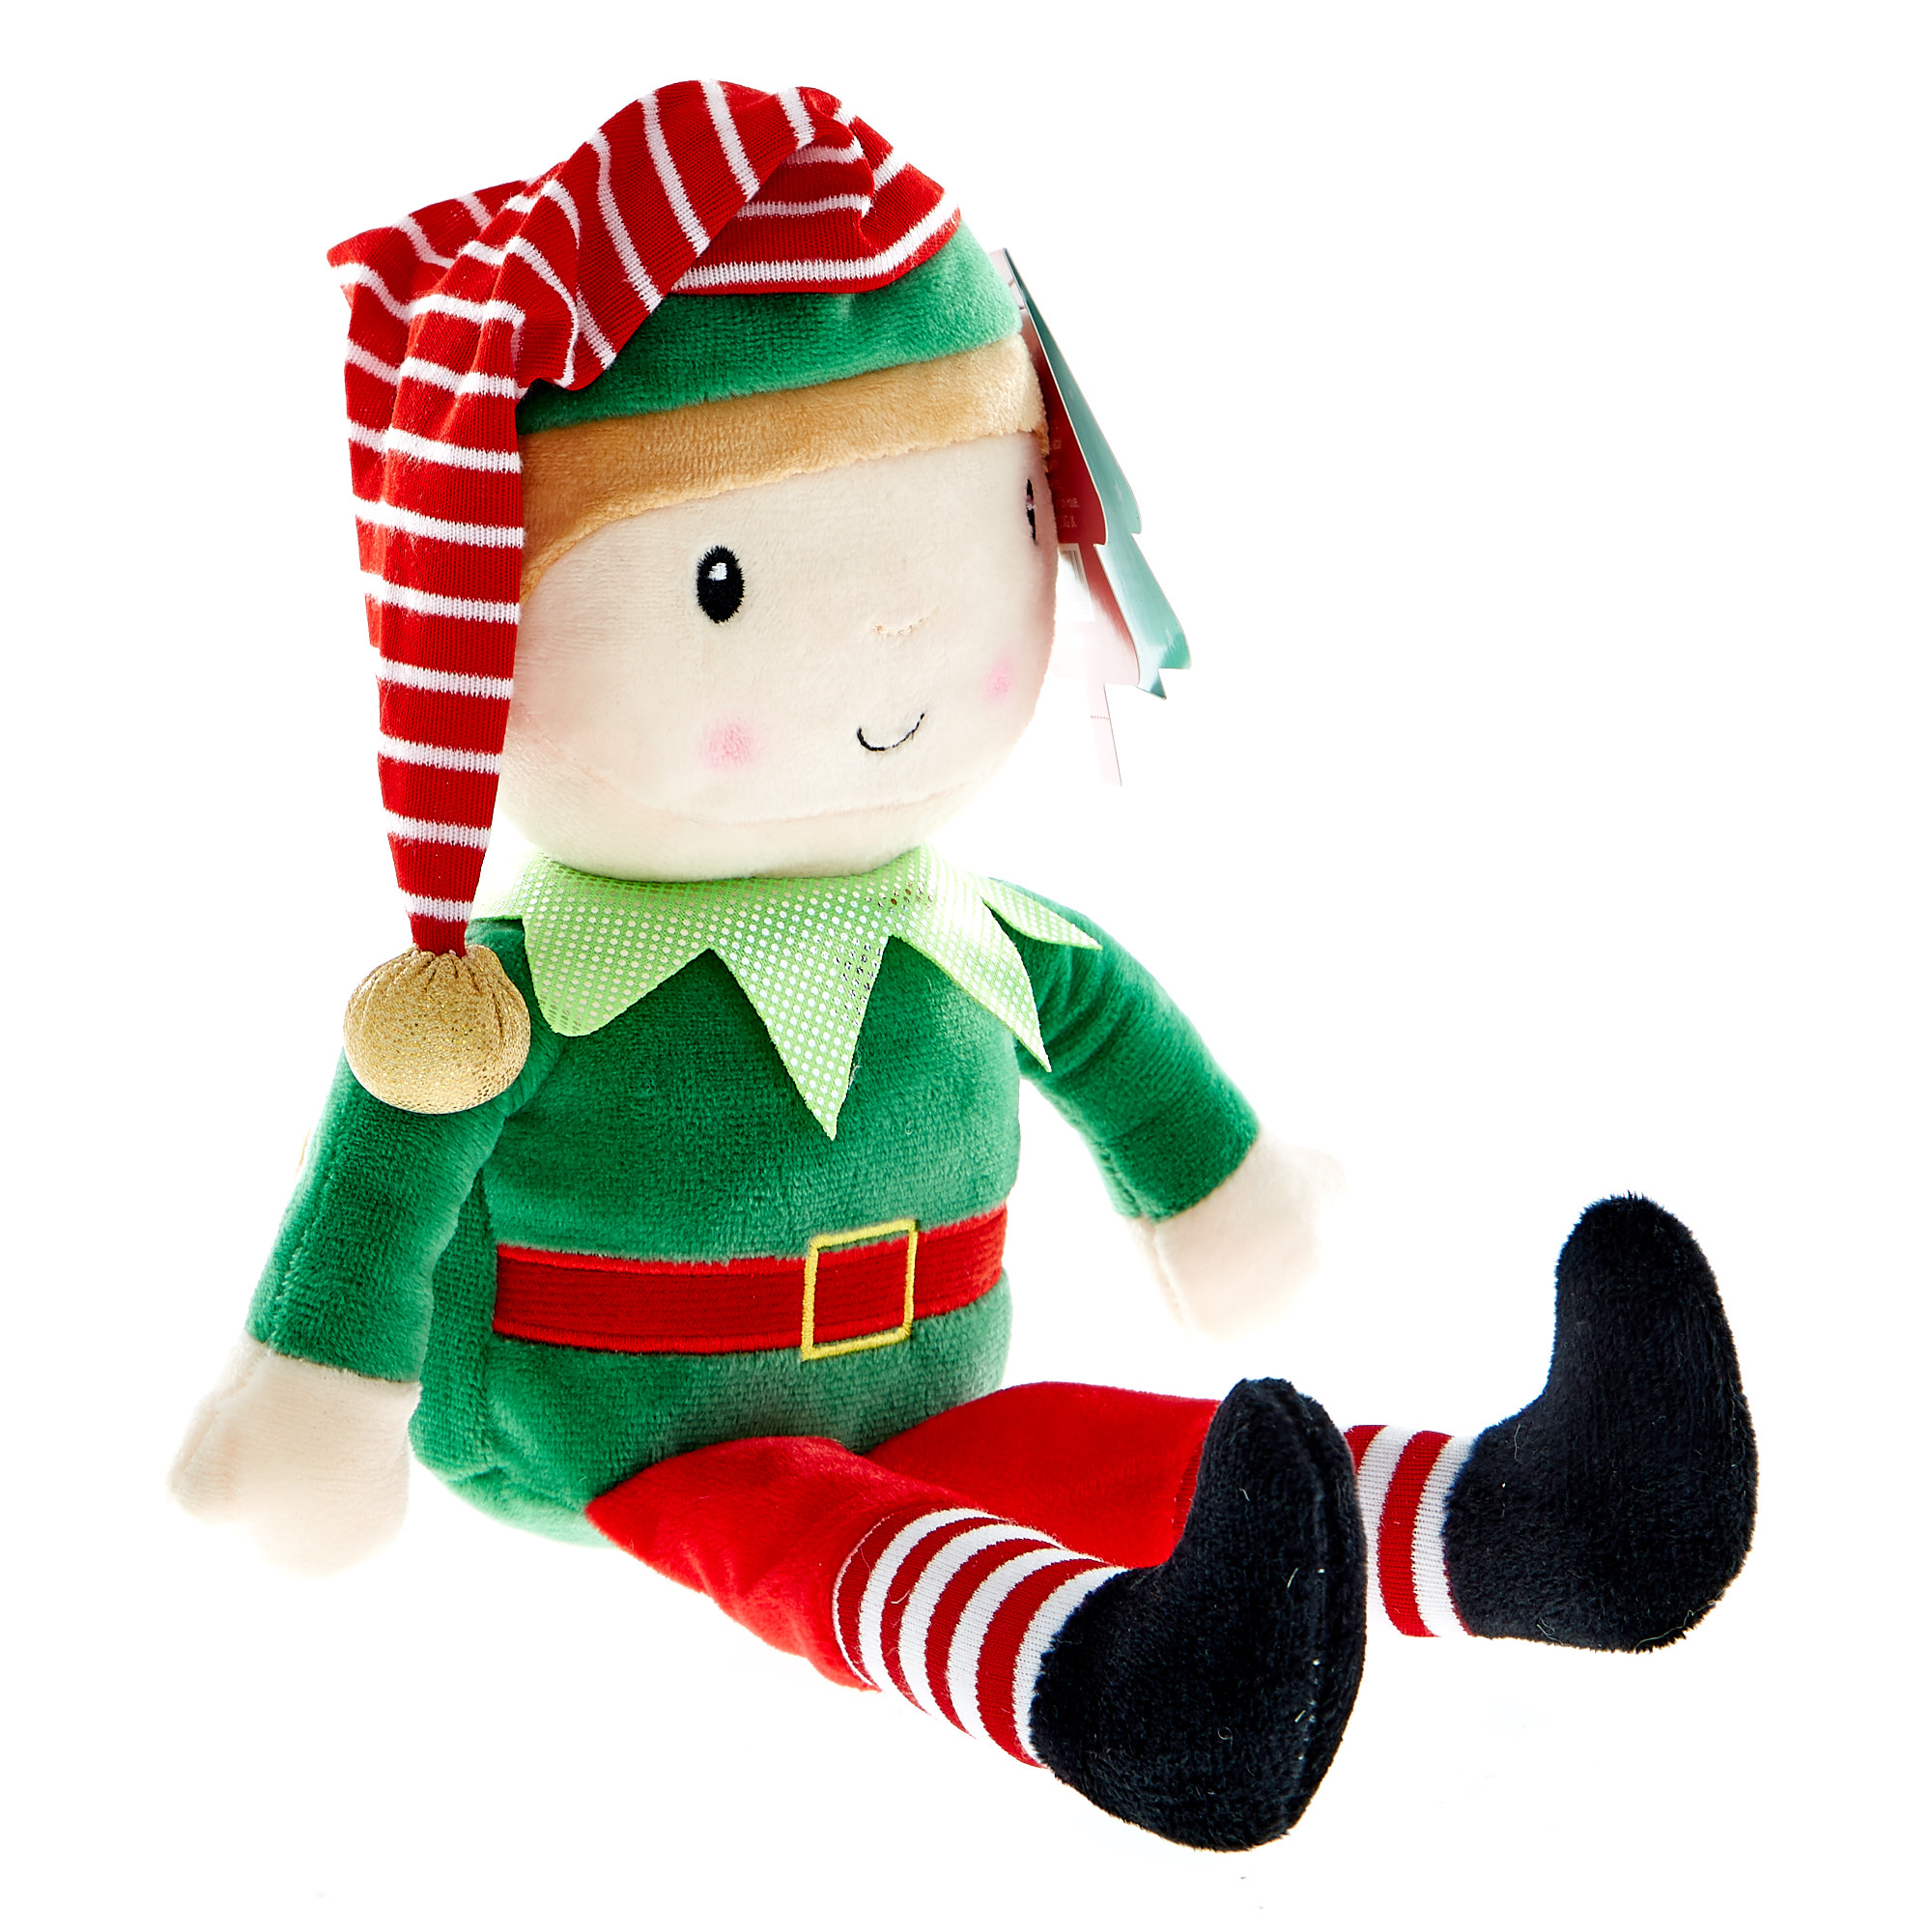 Buy Elf Boy Christmas Soft Toy for GBP 1.99 | Card Factory UK